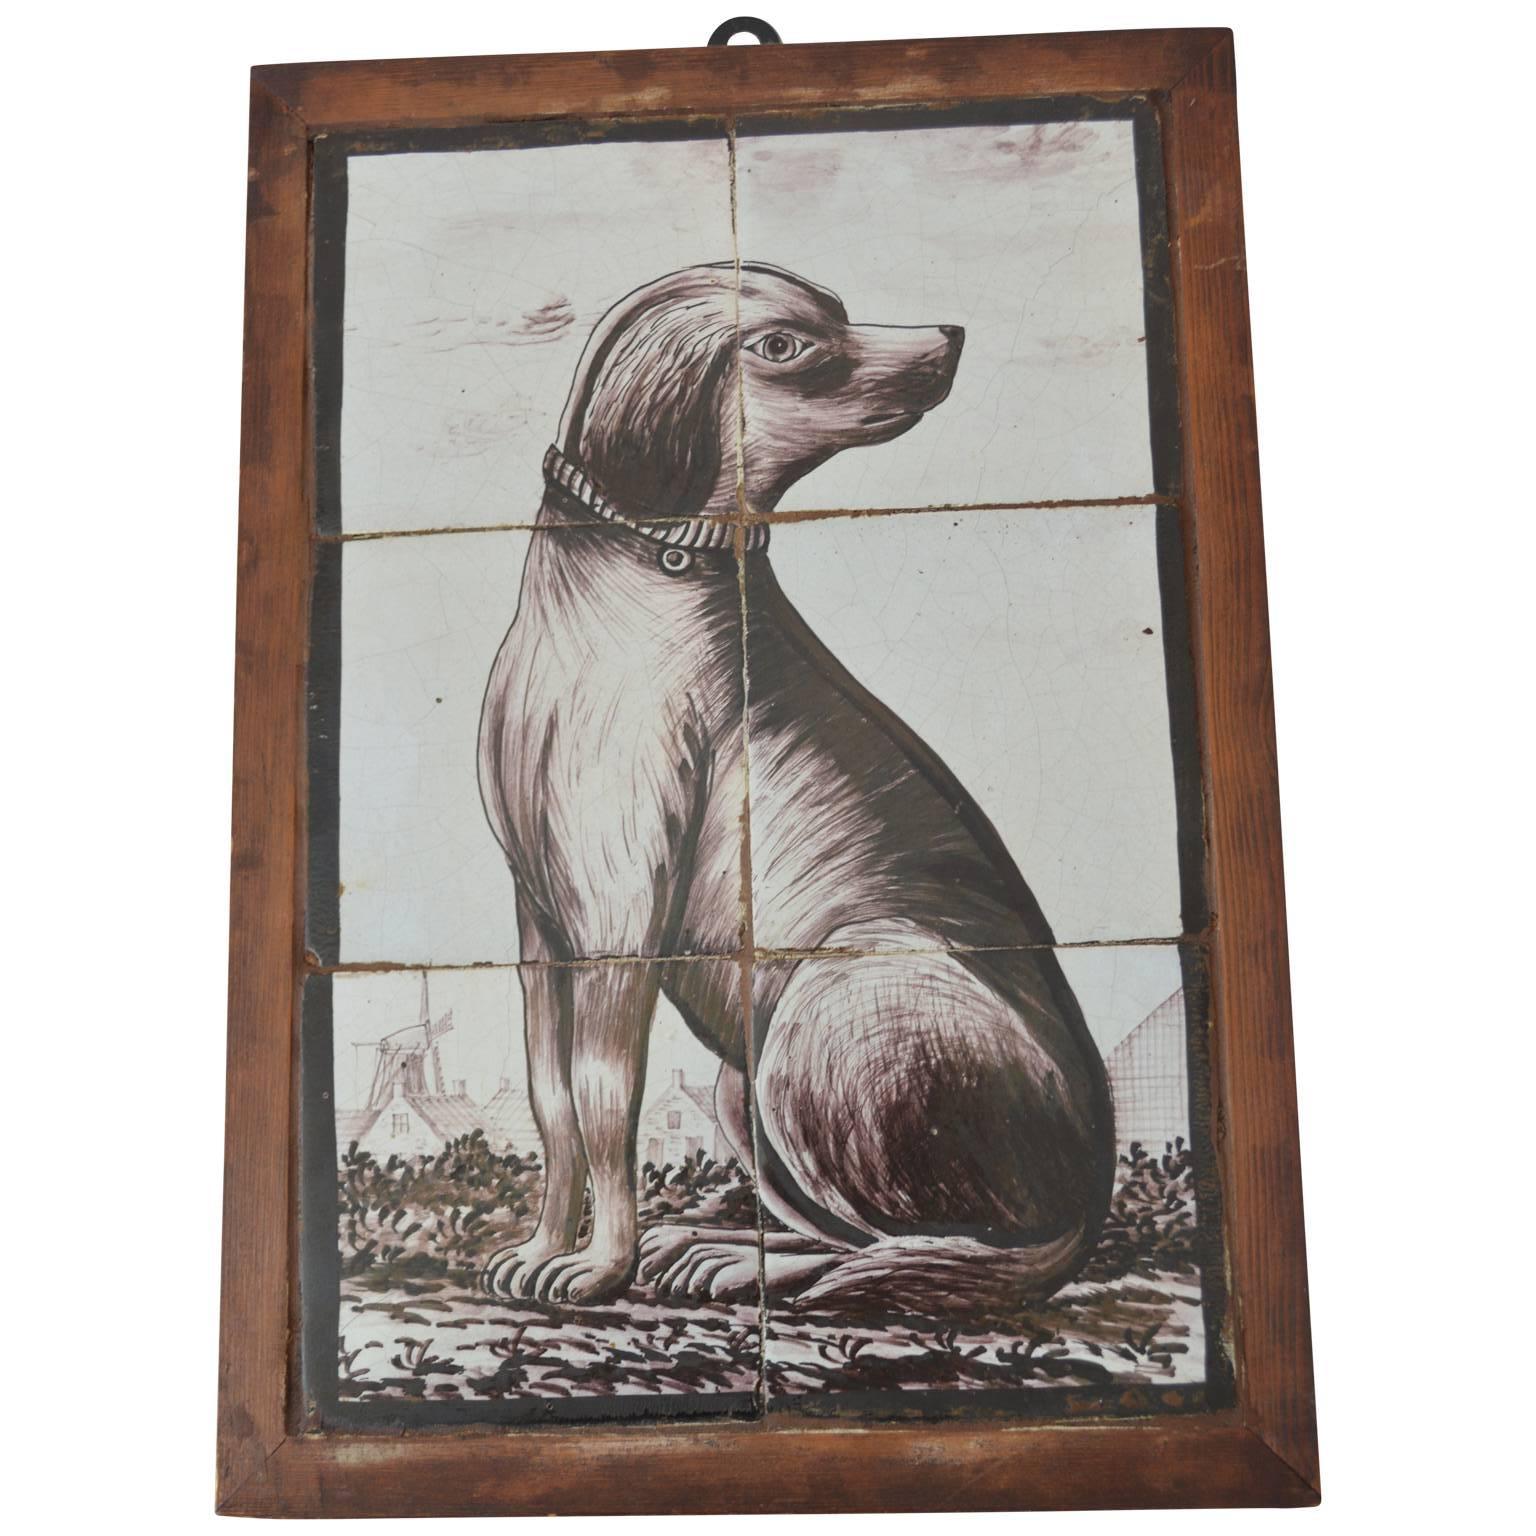 18th Century Delft Tile Picture of a Sitting Dog